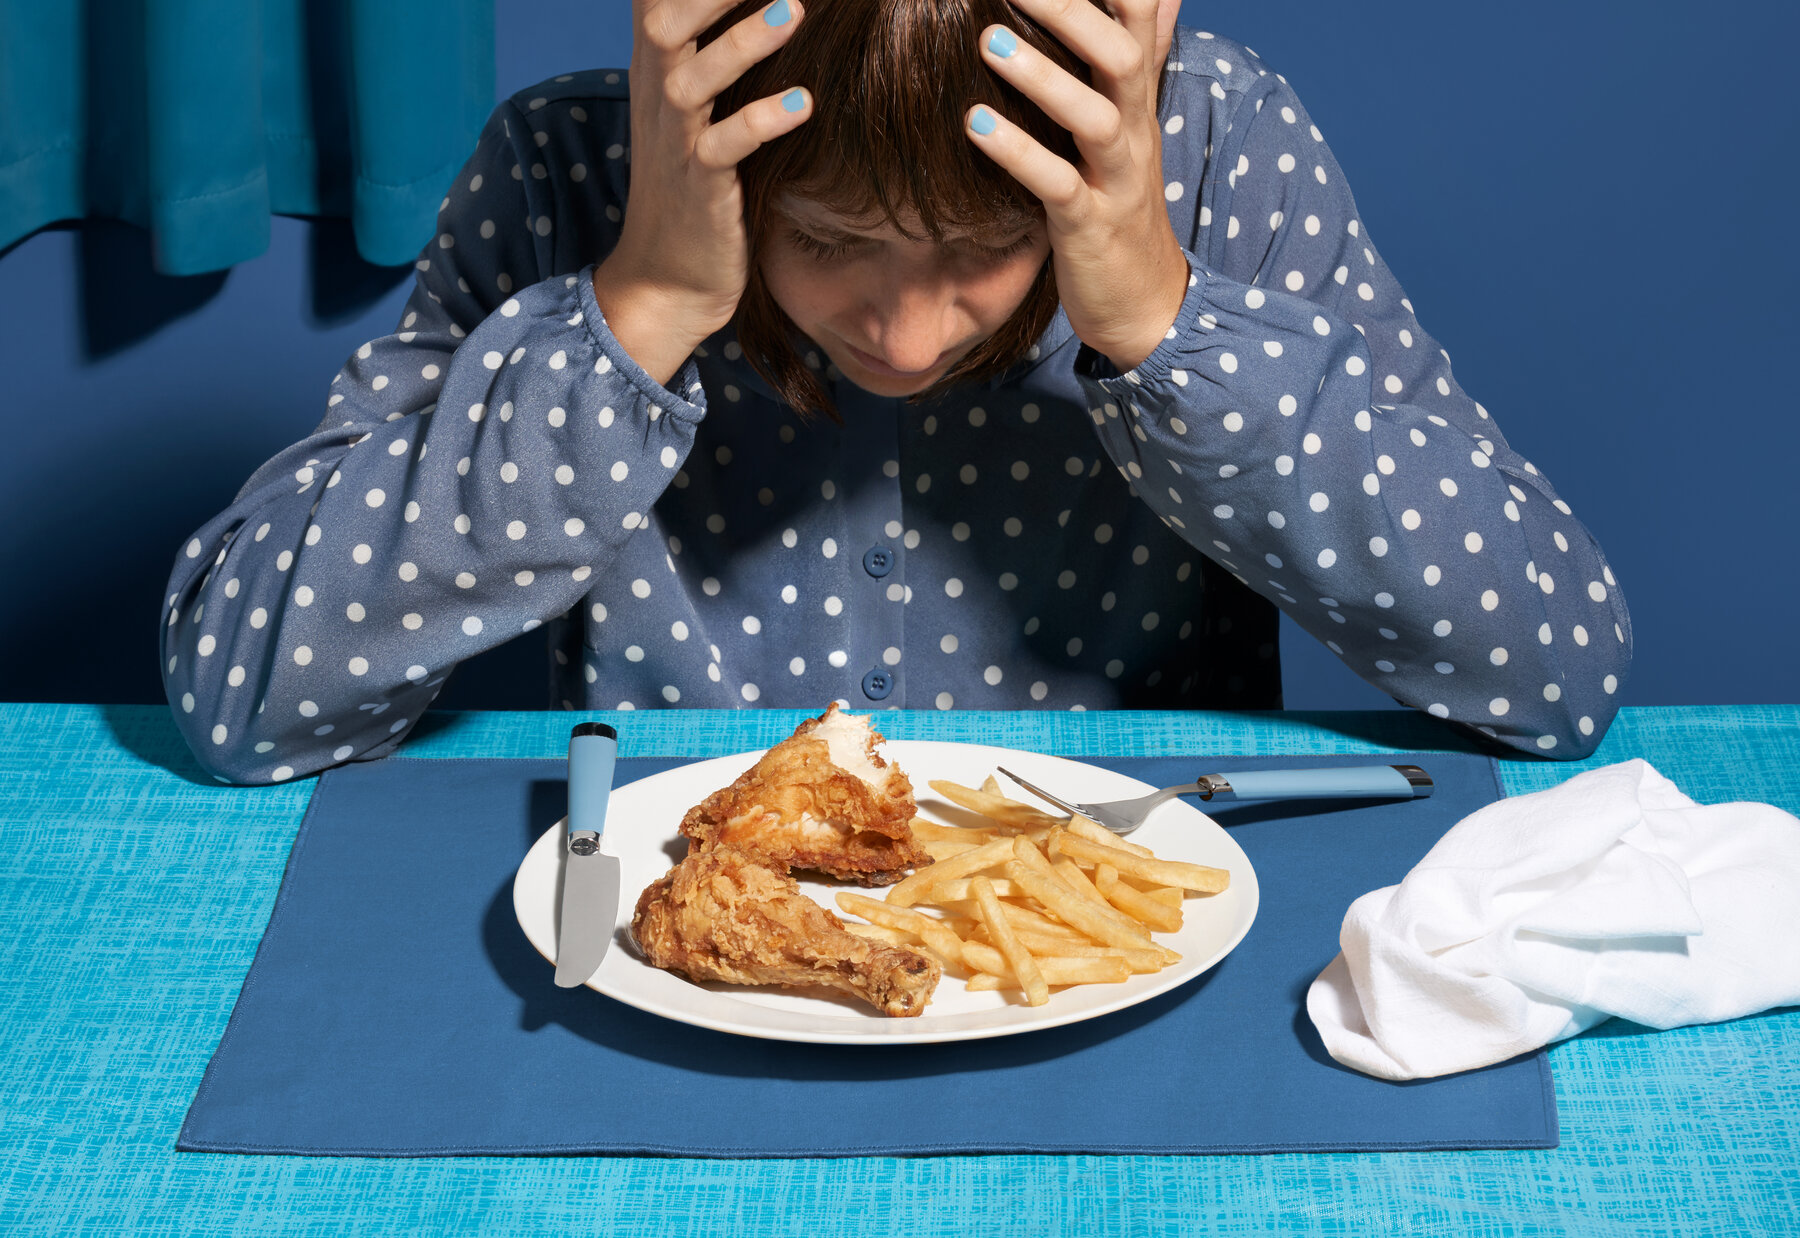 things that will ruin your day - headache while eating